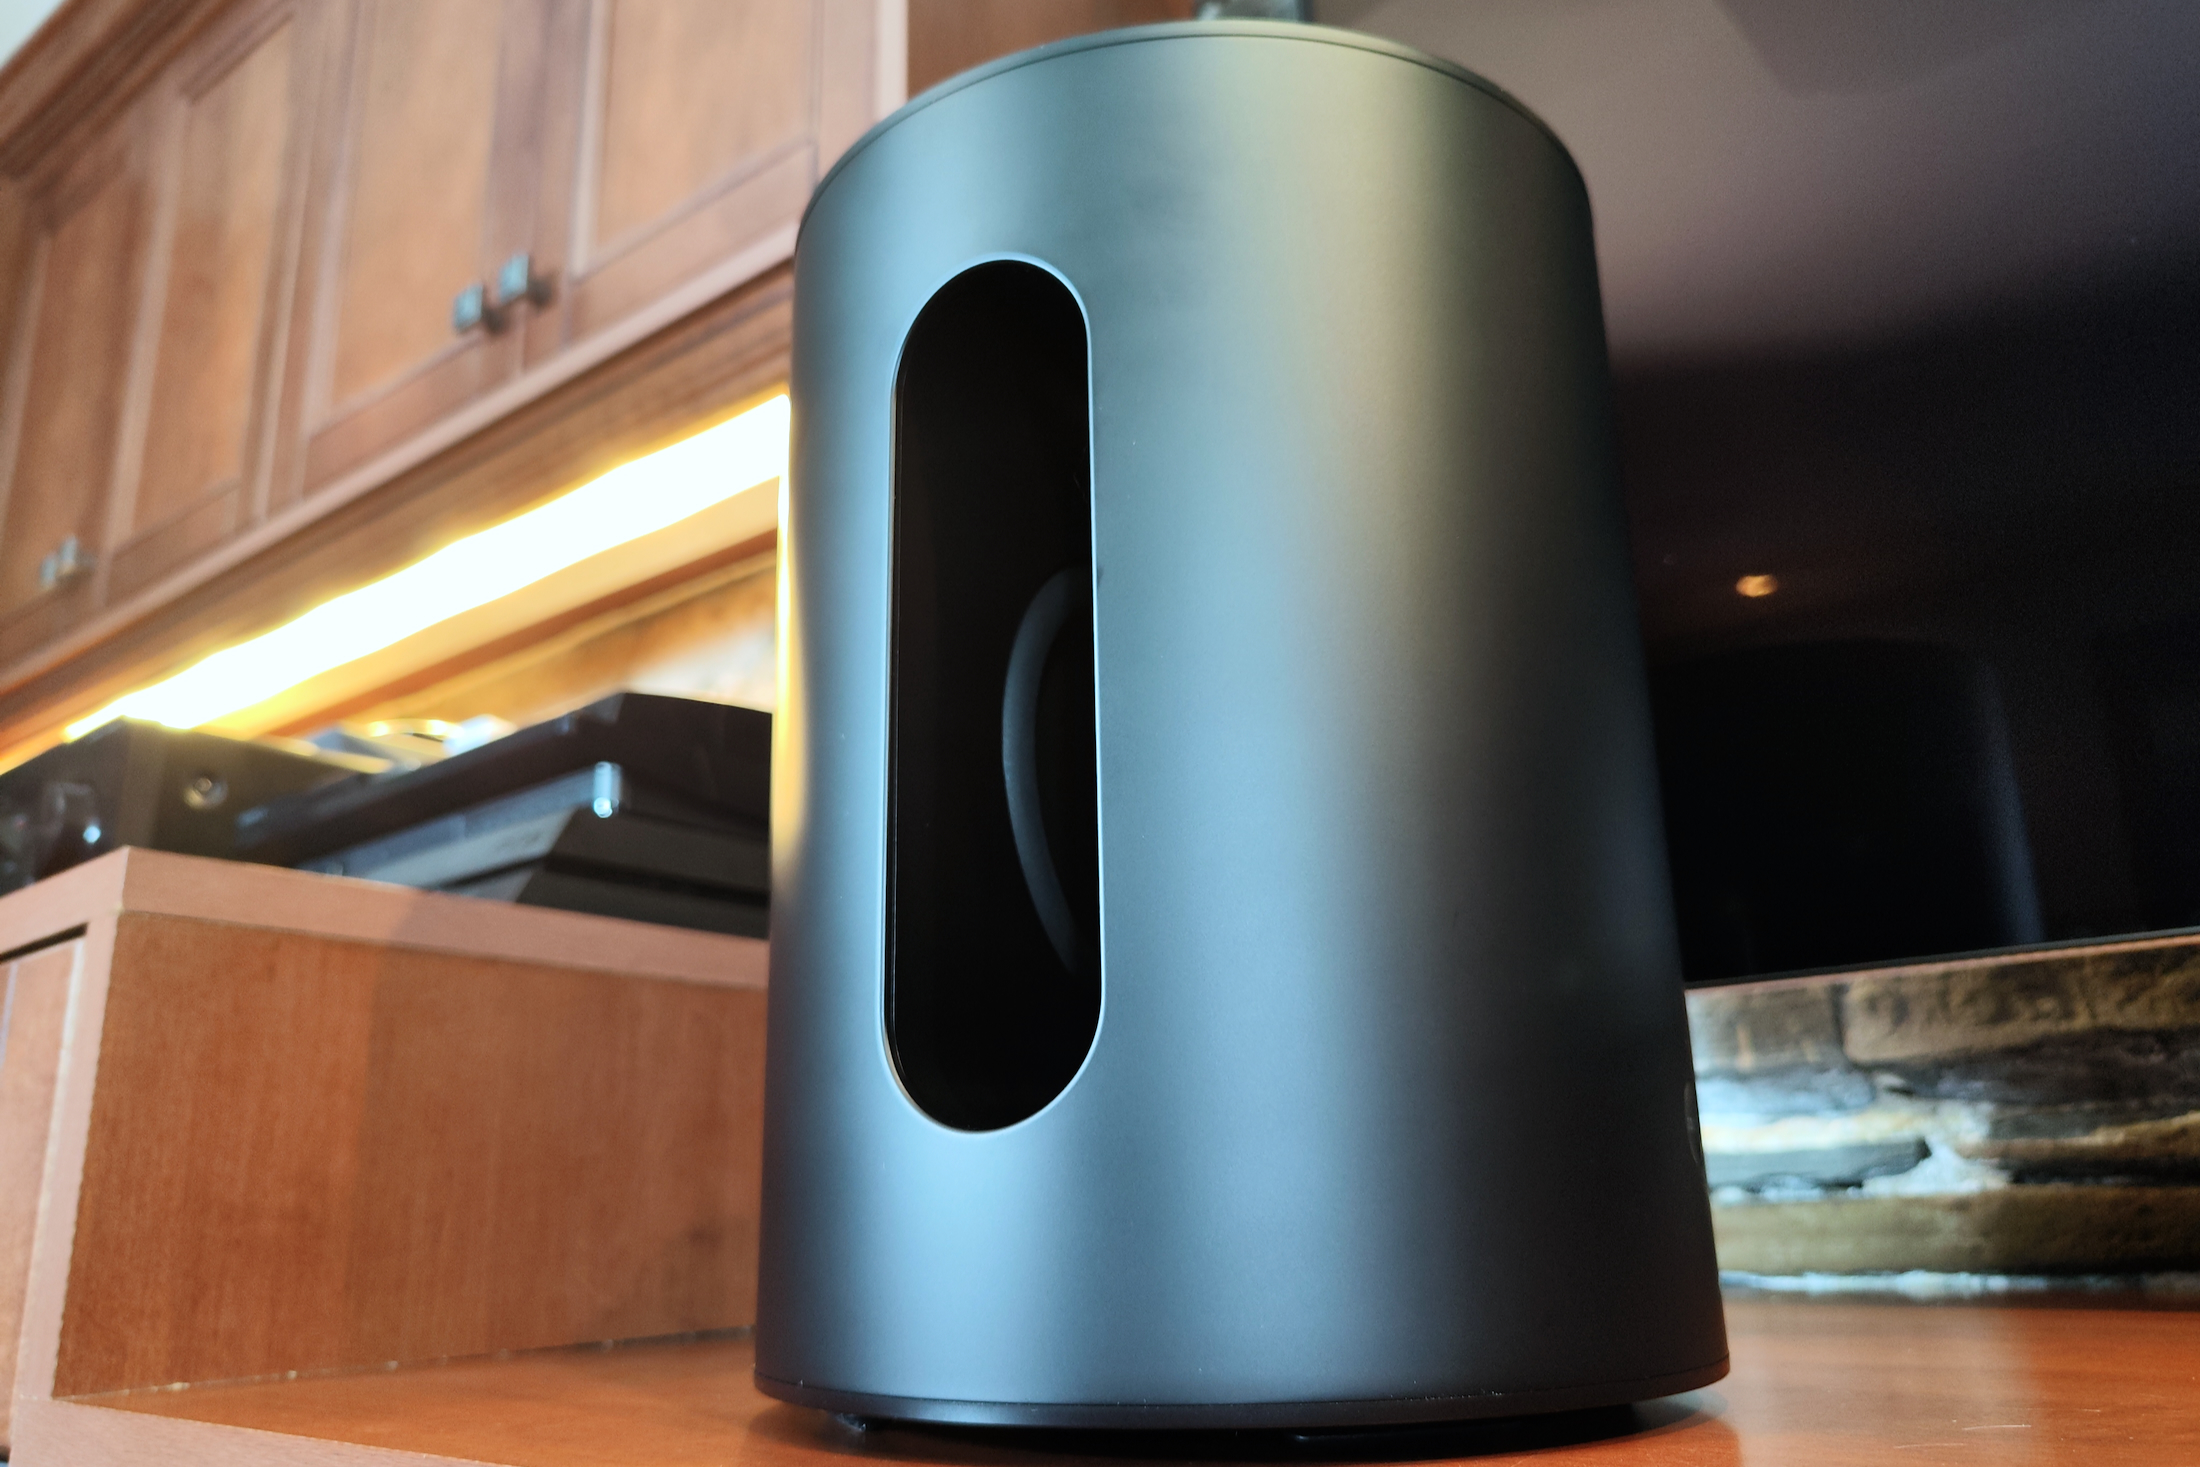 Sonos Sub Mini review: a more affordable sub for Sonos fans